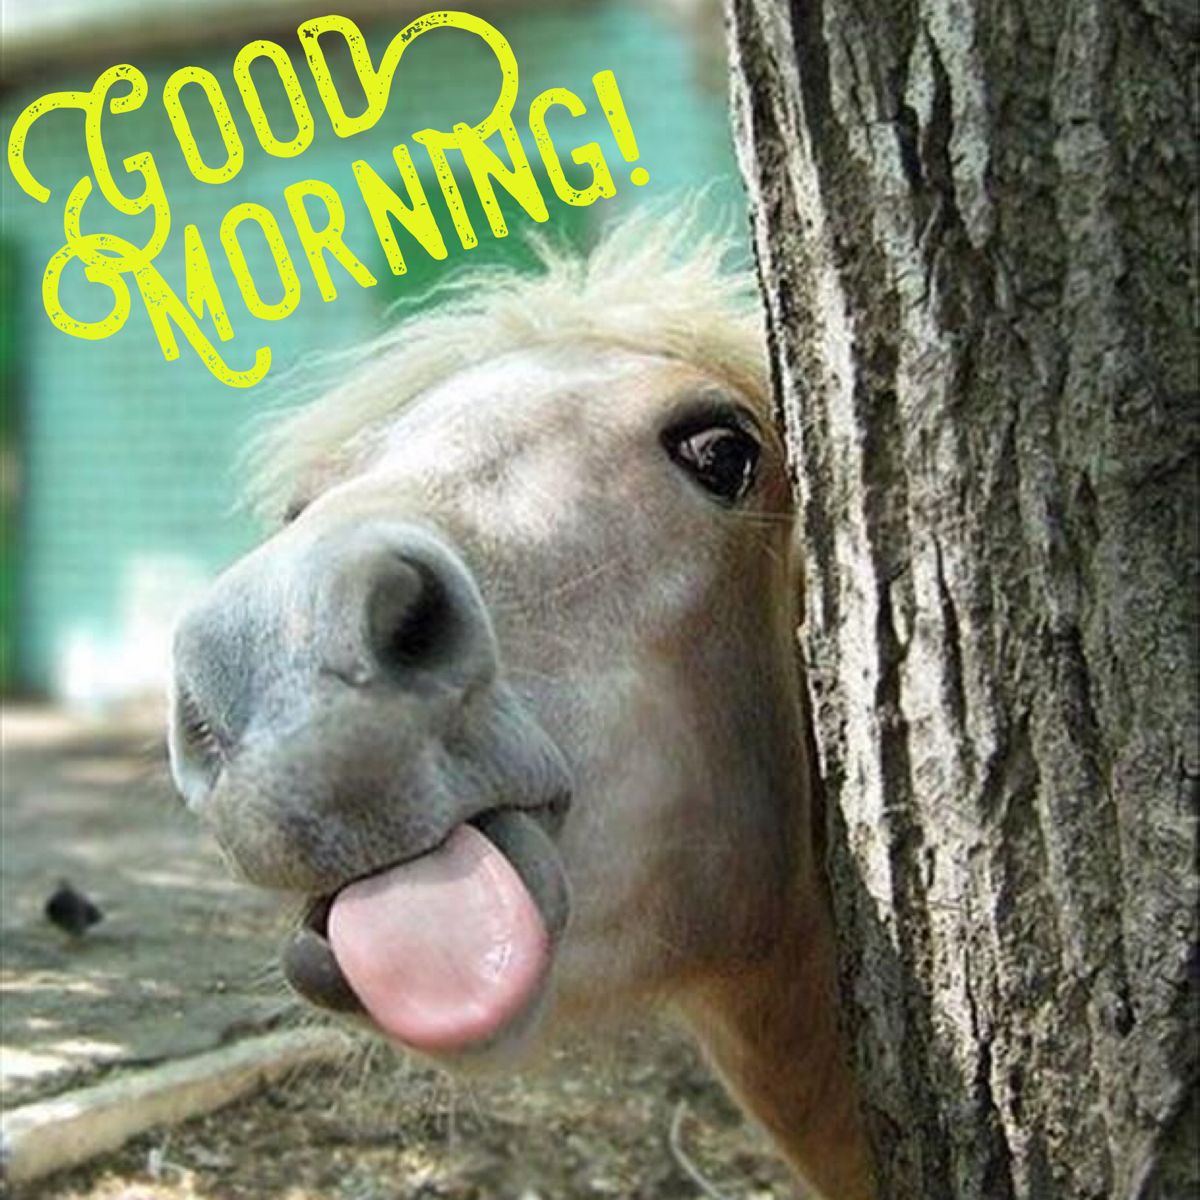 Good Morning Funny Horse Images